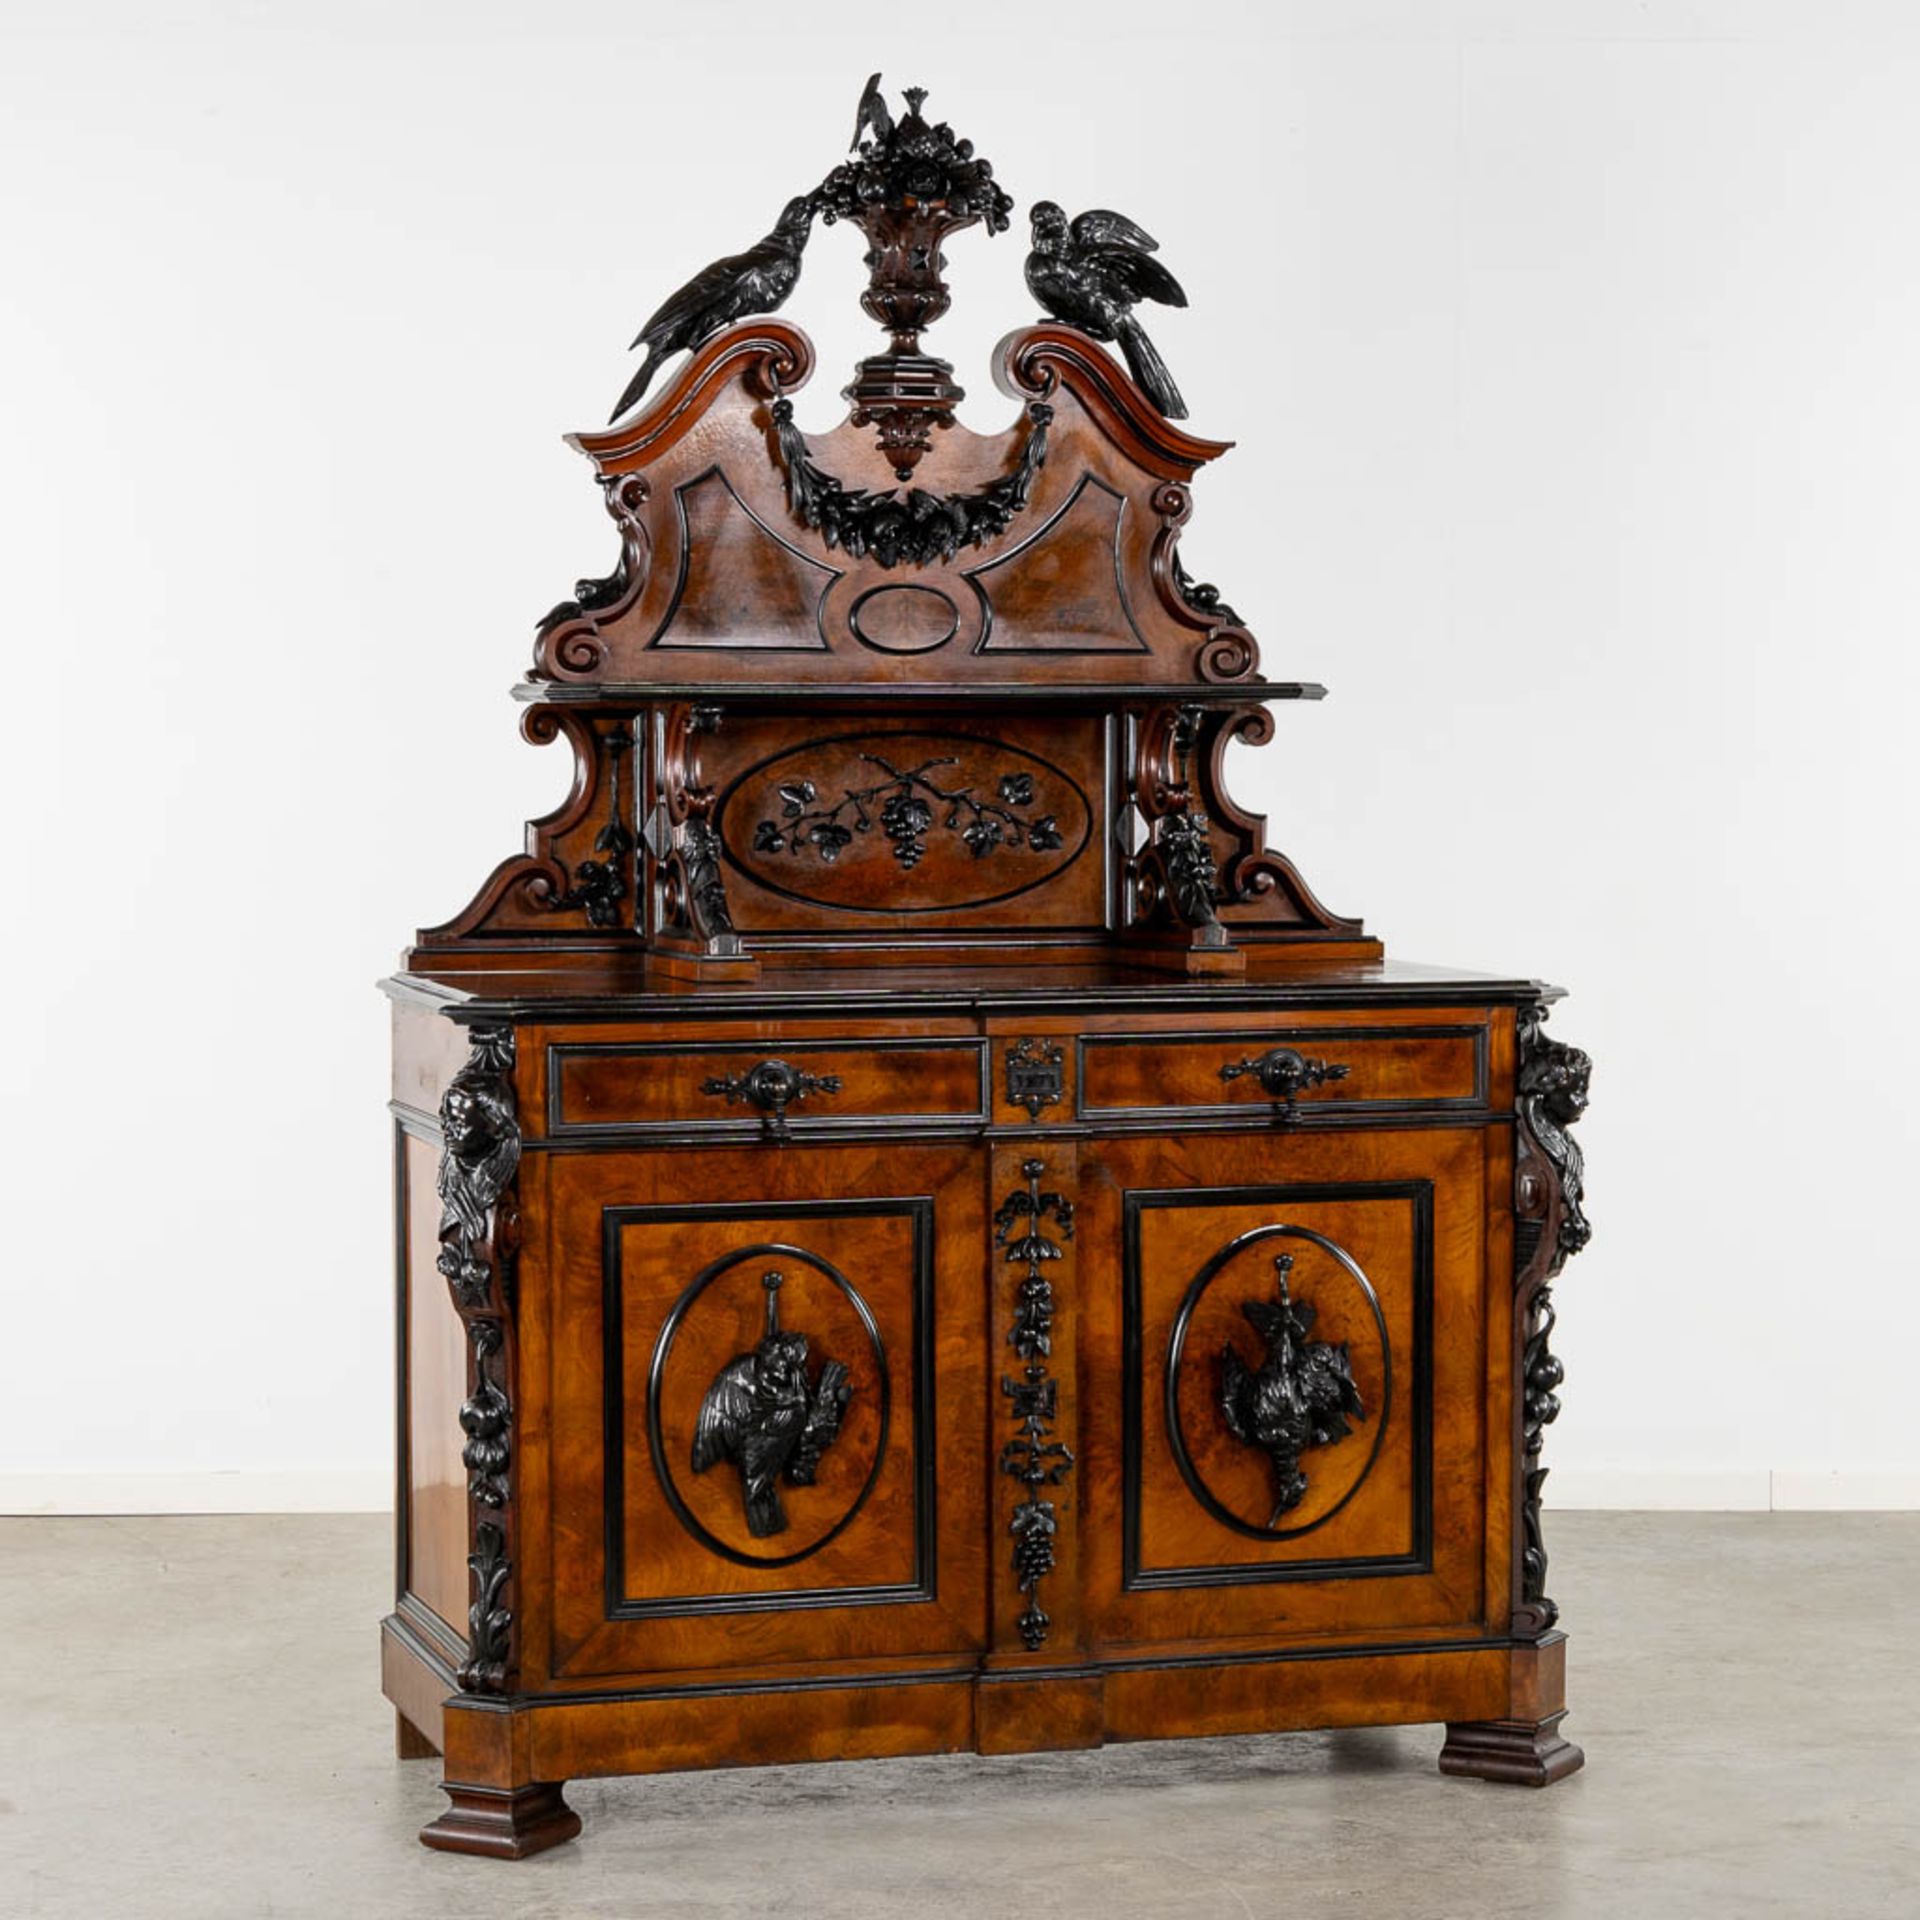 An impressive 'Saint Hubert' hunting cabinet with fine wood sculptures, dated 1871. (L:63 x W:143 x